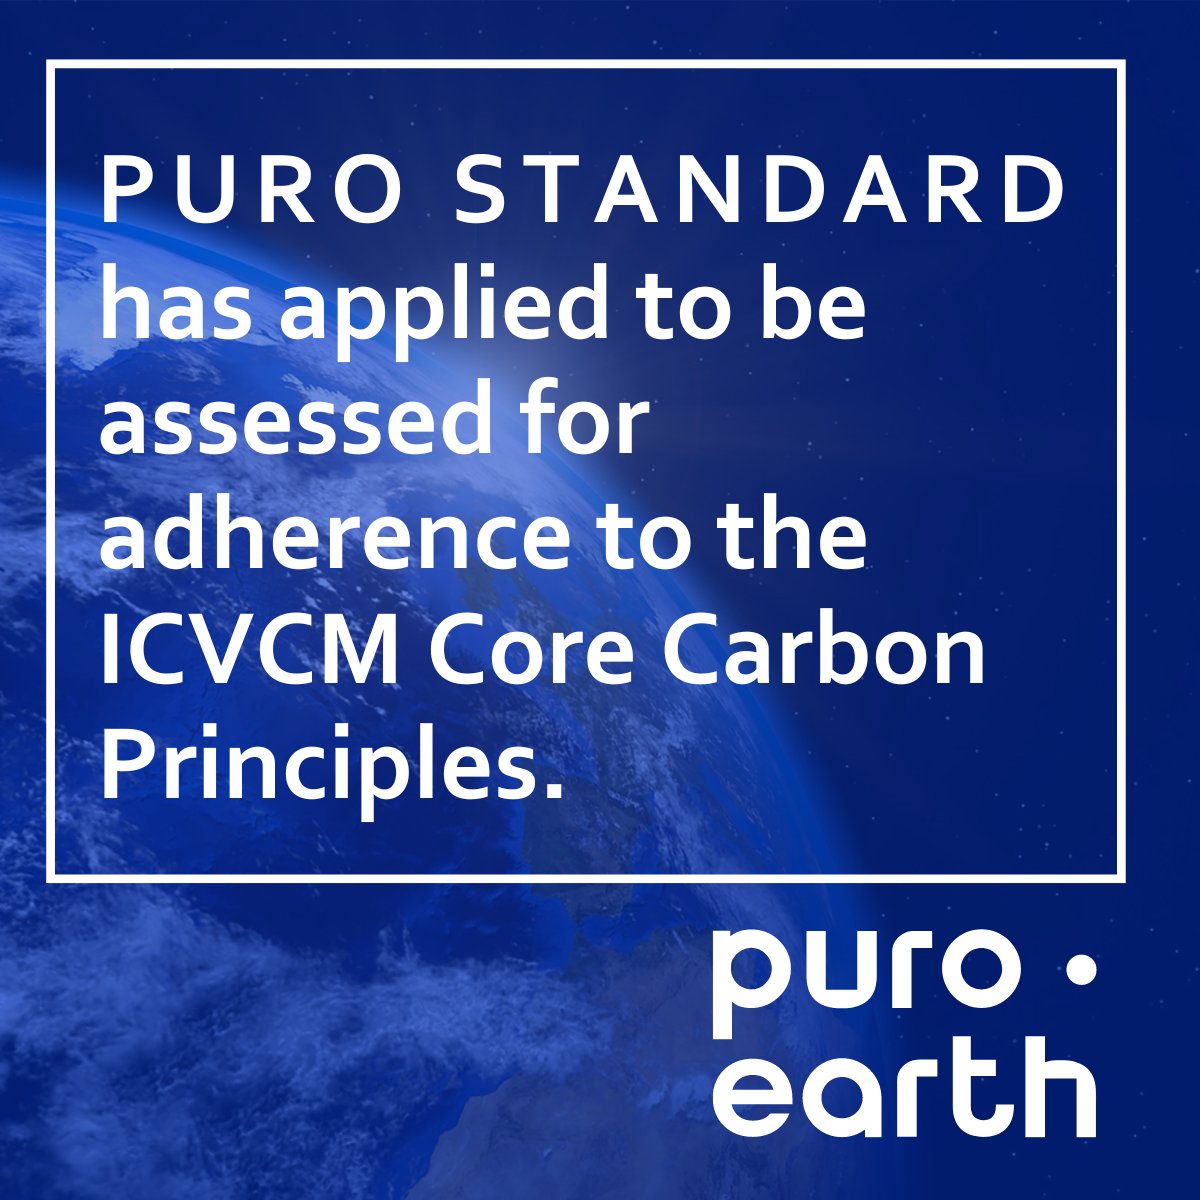 Today, we are proud to announce that Puro Standard has applied to The Integrity Council for the Voluntary Carbon Market (ICVCM) to be assessed for adherence to the Core Carbon Principles (CCP) criteria.
#VoluntaryCarbonMarket #PuroCO2Removal